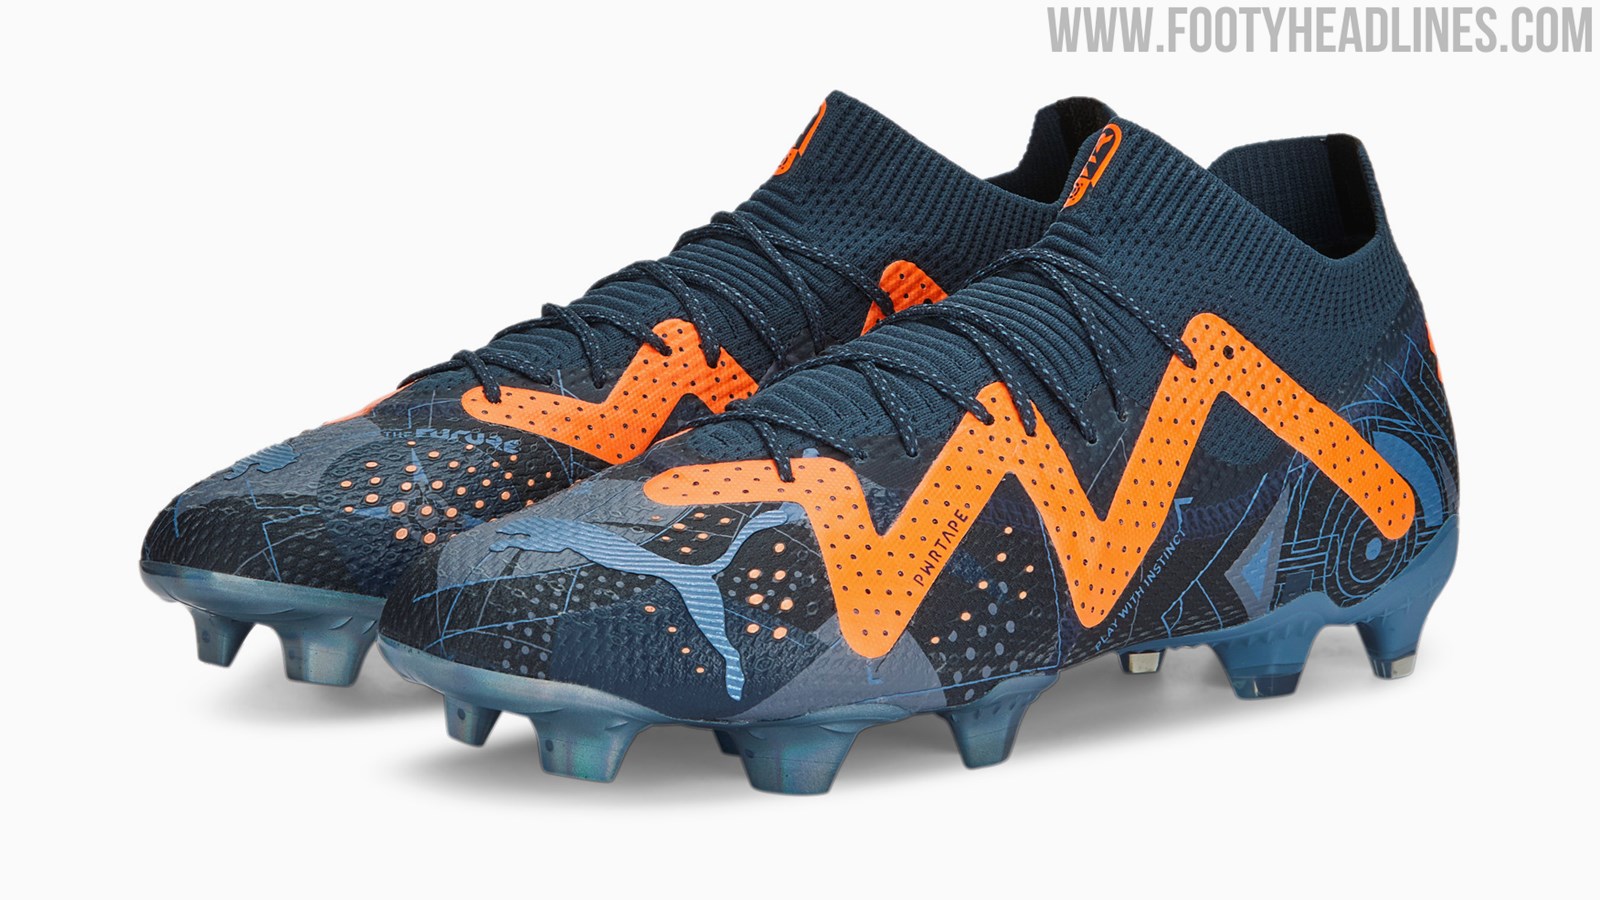 Sell All-New Puma Future Ultimate Boots Released - Worn by Neymar ...